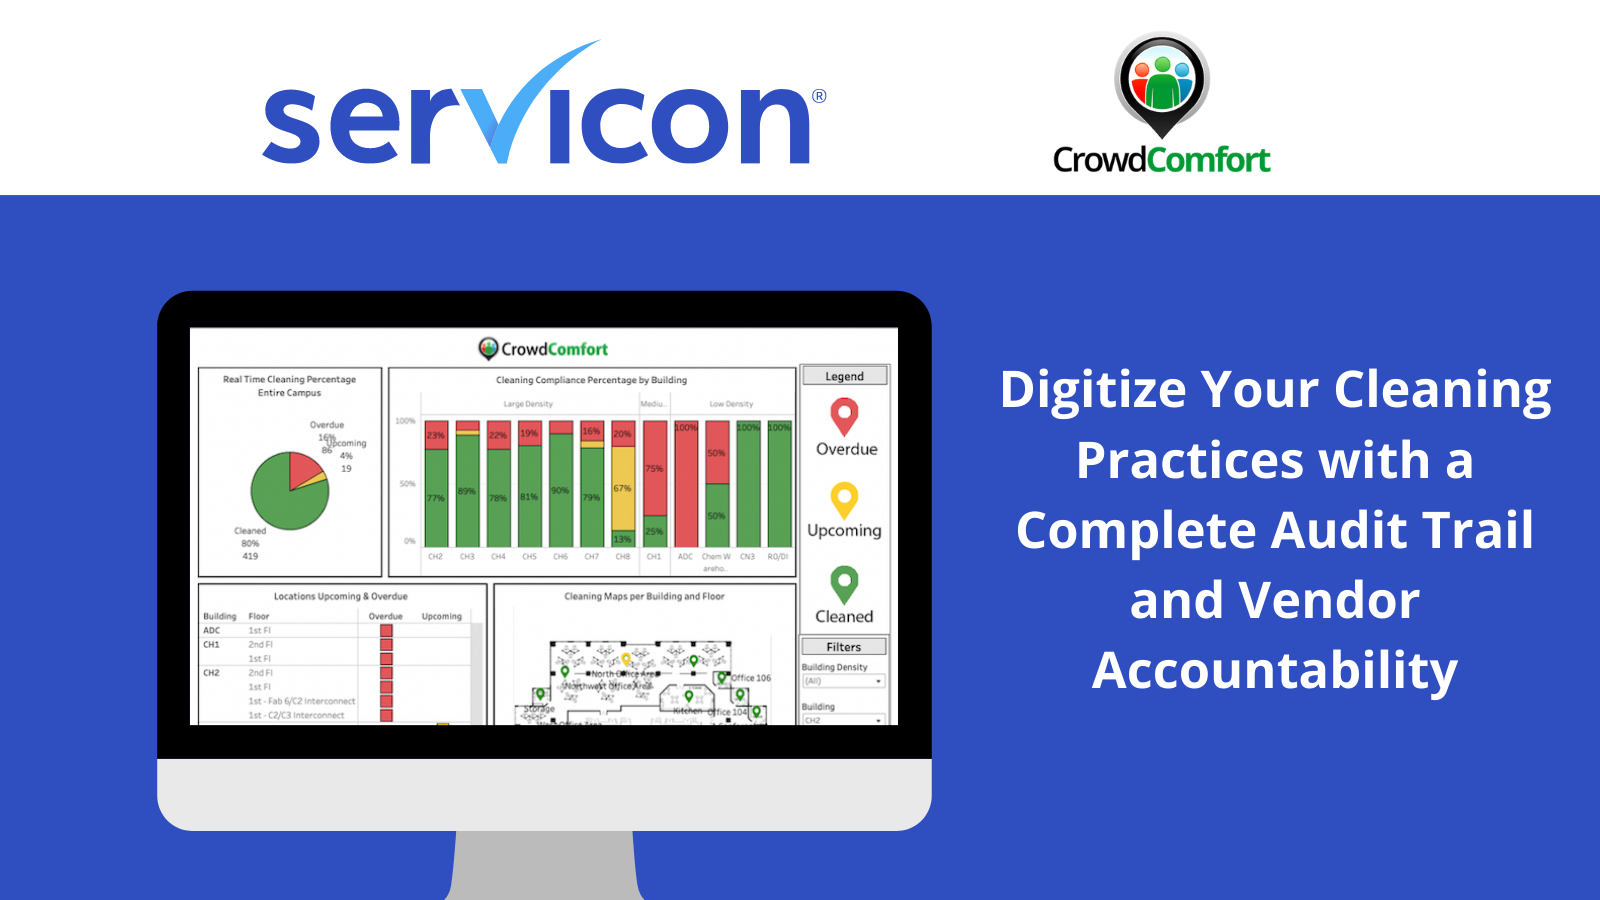 Servicon CrowdComfort Cleaning Maps